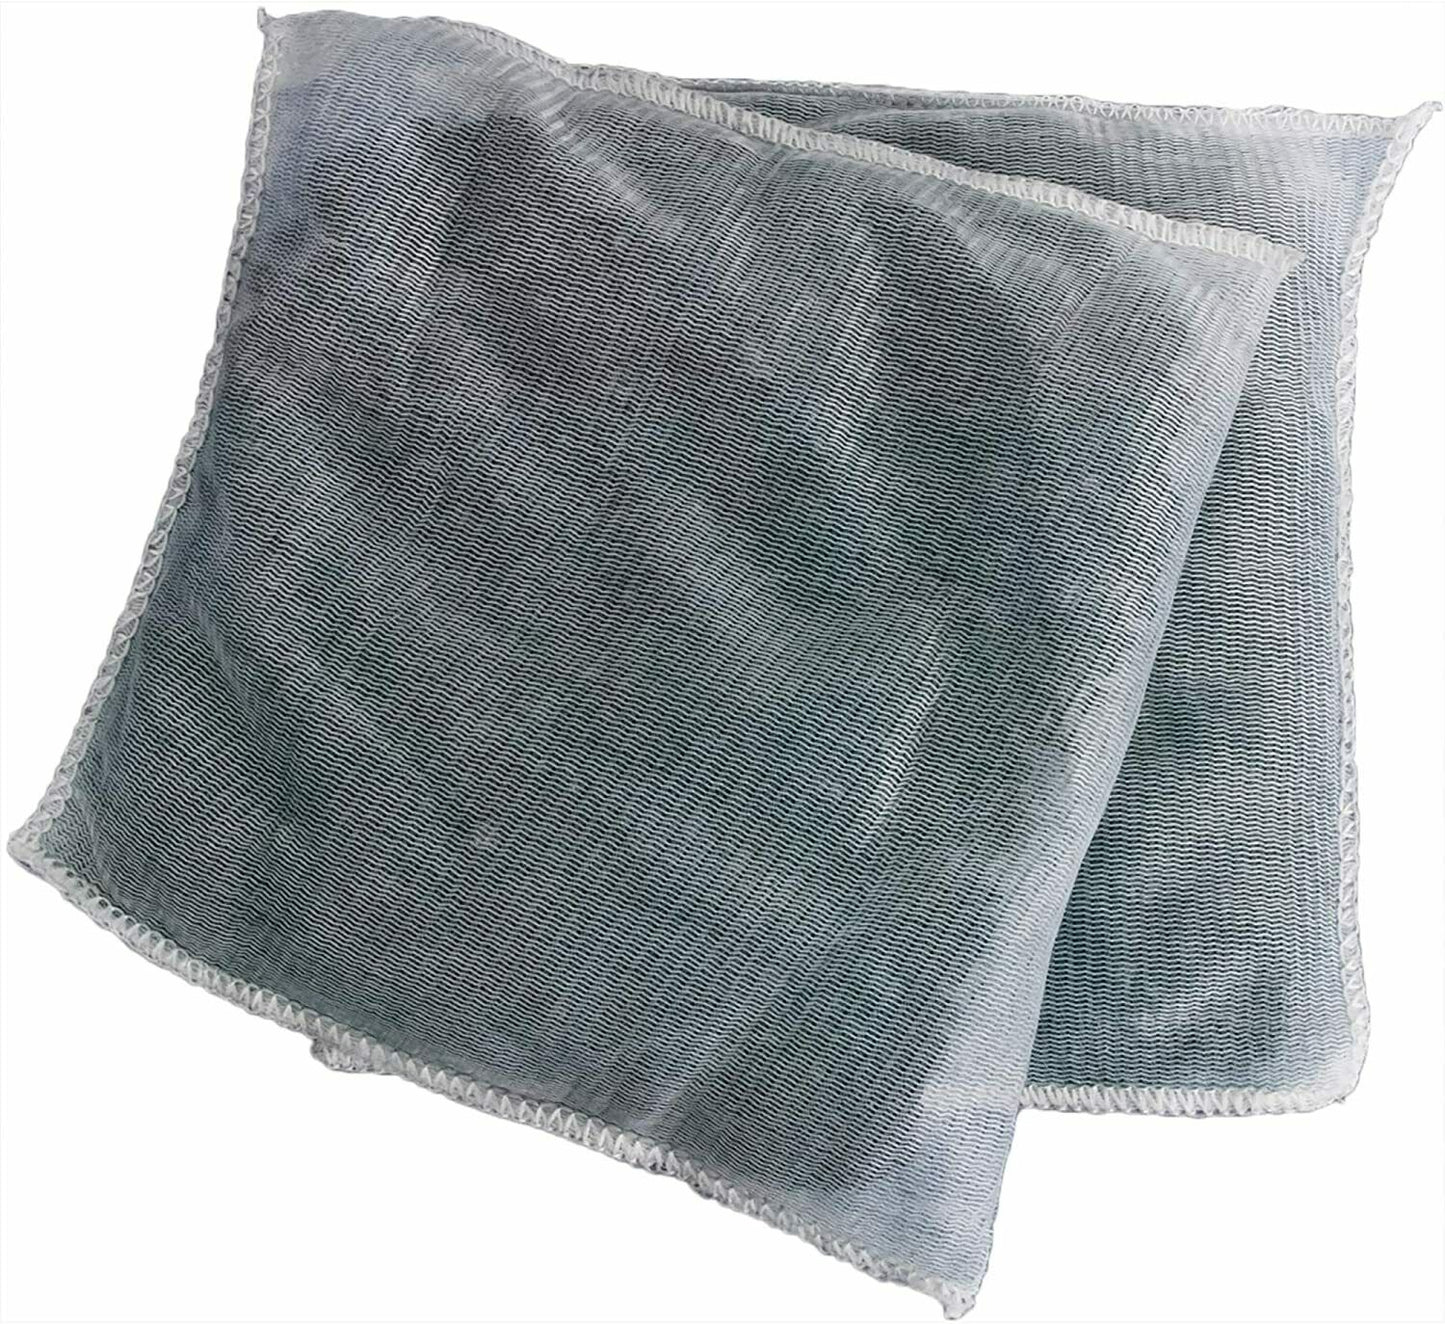 Marineland Aquarium Canister Filter Carbon Bags for C-Series/Magniflow Canisters